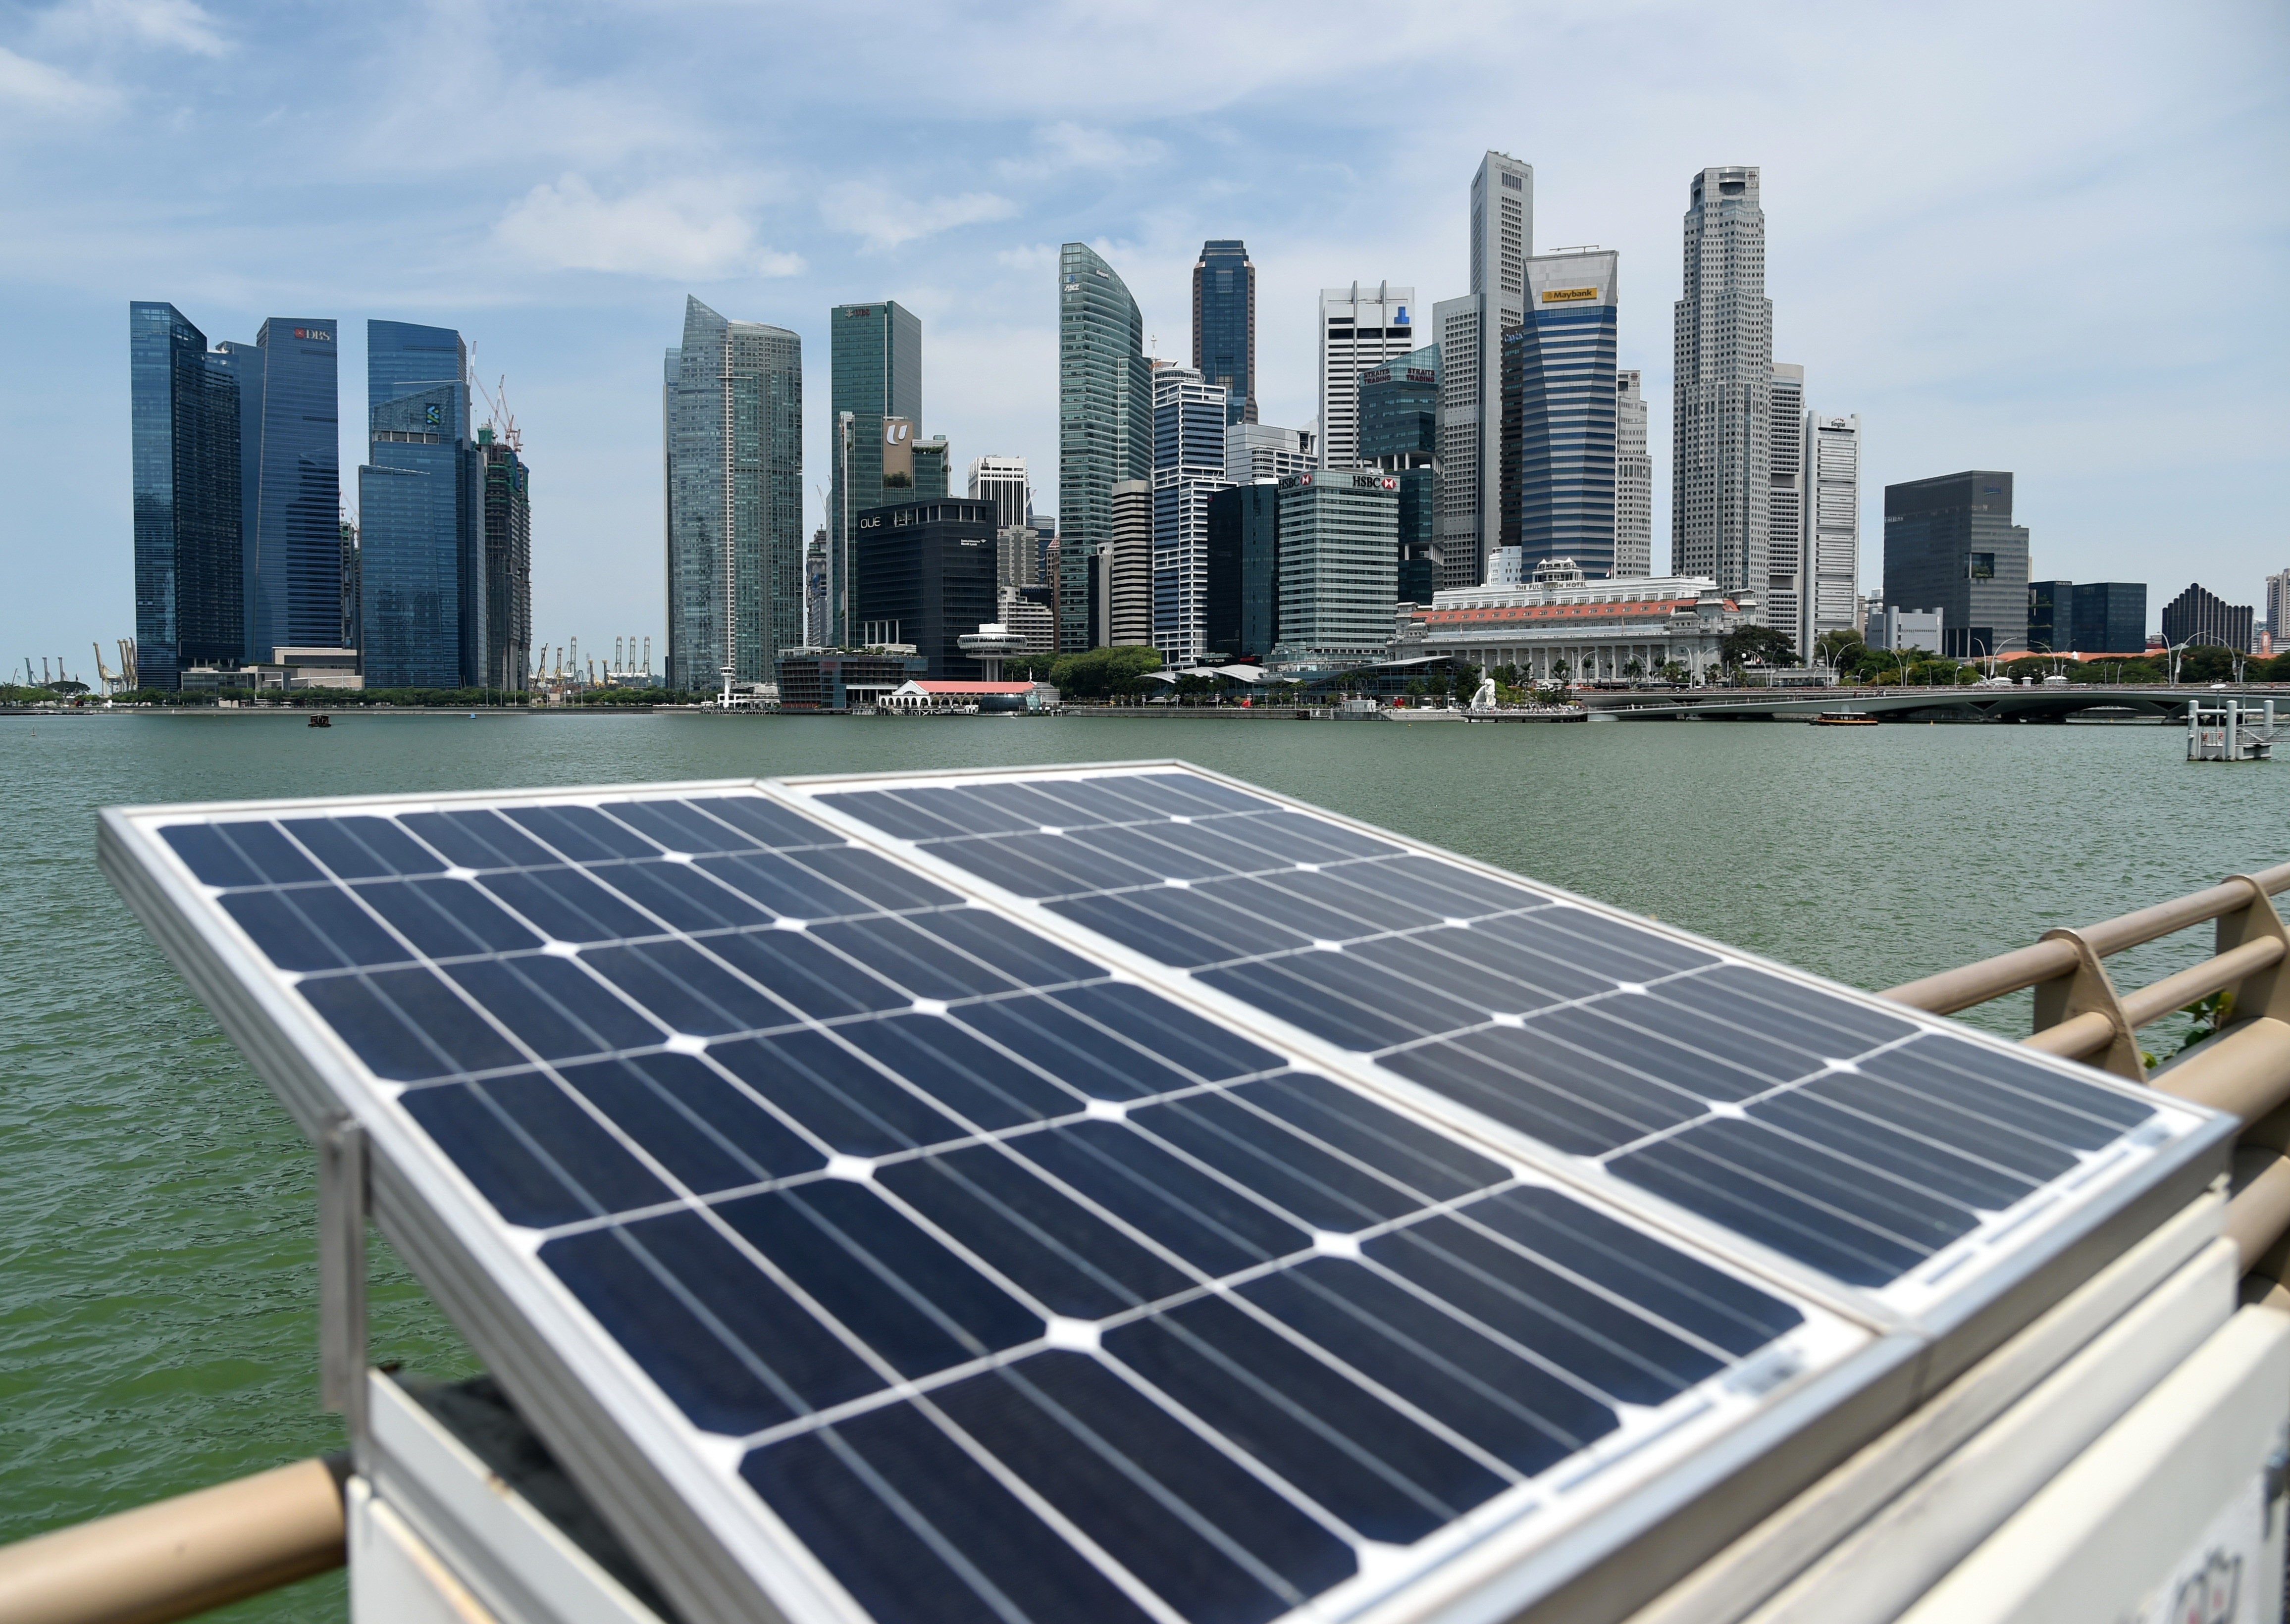 Solar panels used to power walkway lights are positioned along the Marina Bay overlooking the skyscrapers of Singapore in April last year. Singapore’s efficiency ratio on innovation is below the global average, and it is not a good example for Hong Kong to mirror. Photo: AFP